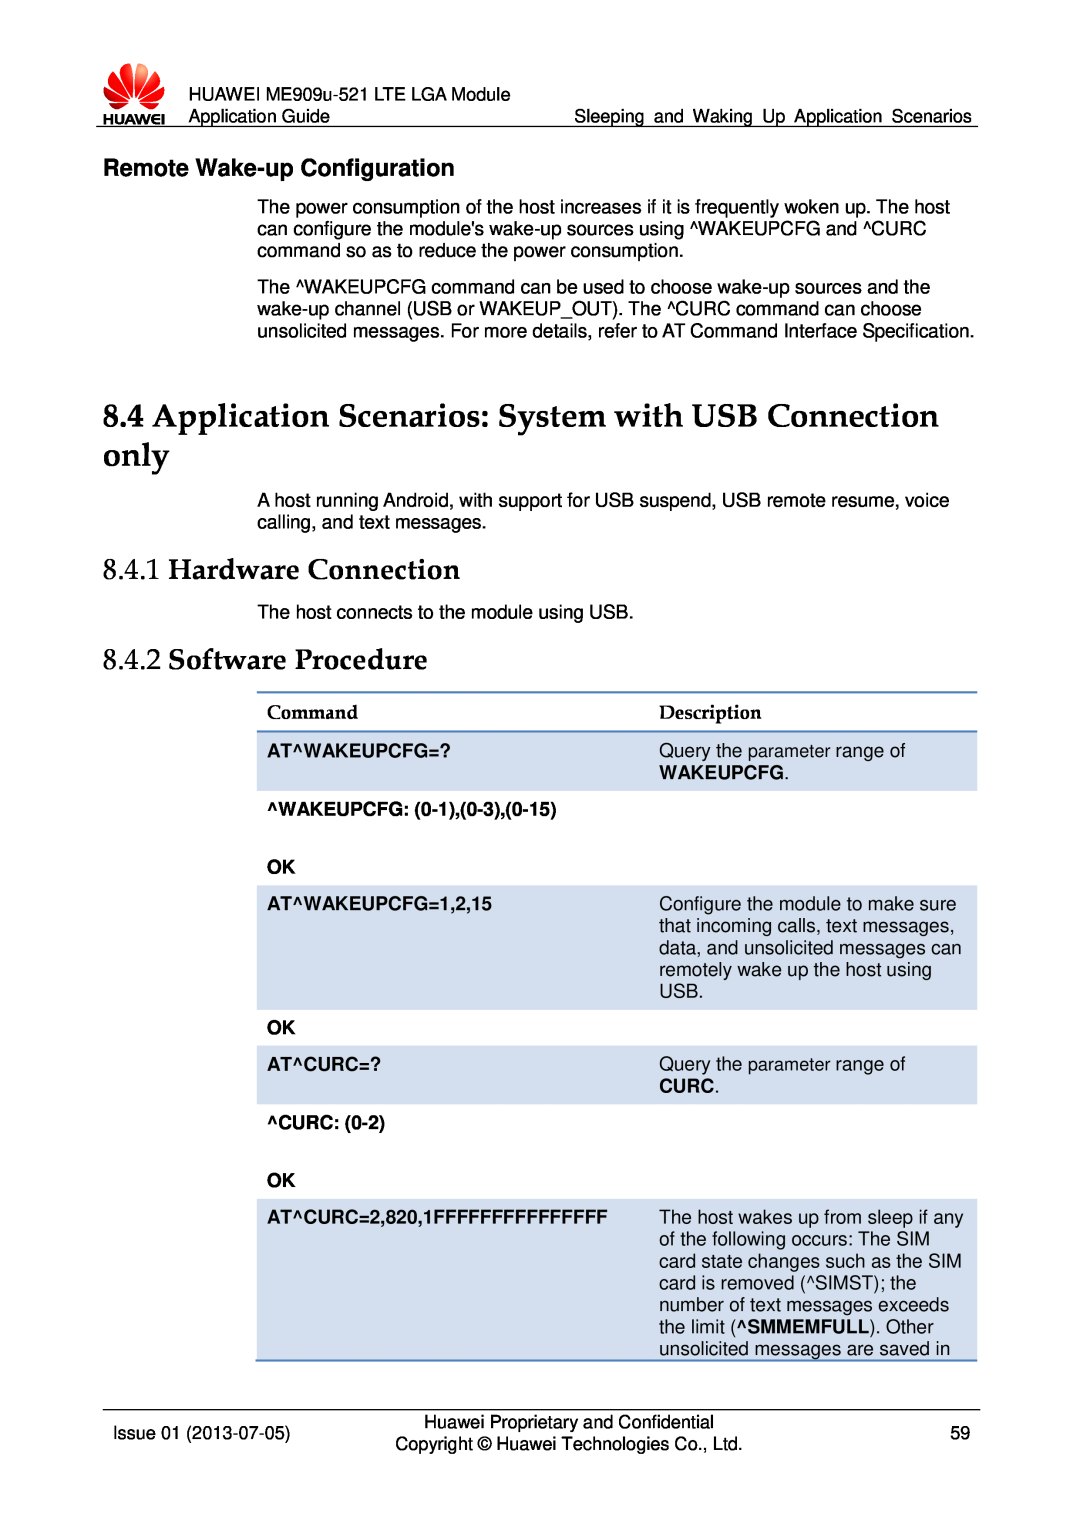 Huawei ME909u-521 manual Application Scenarios System with USB Connection only, Hardware Connection, Software Procedure 